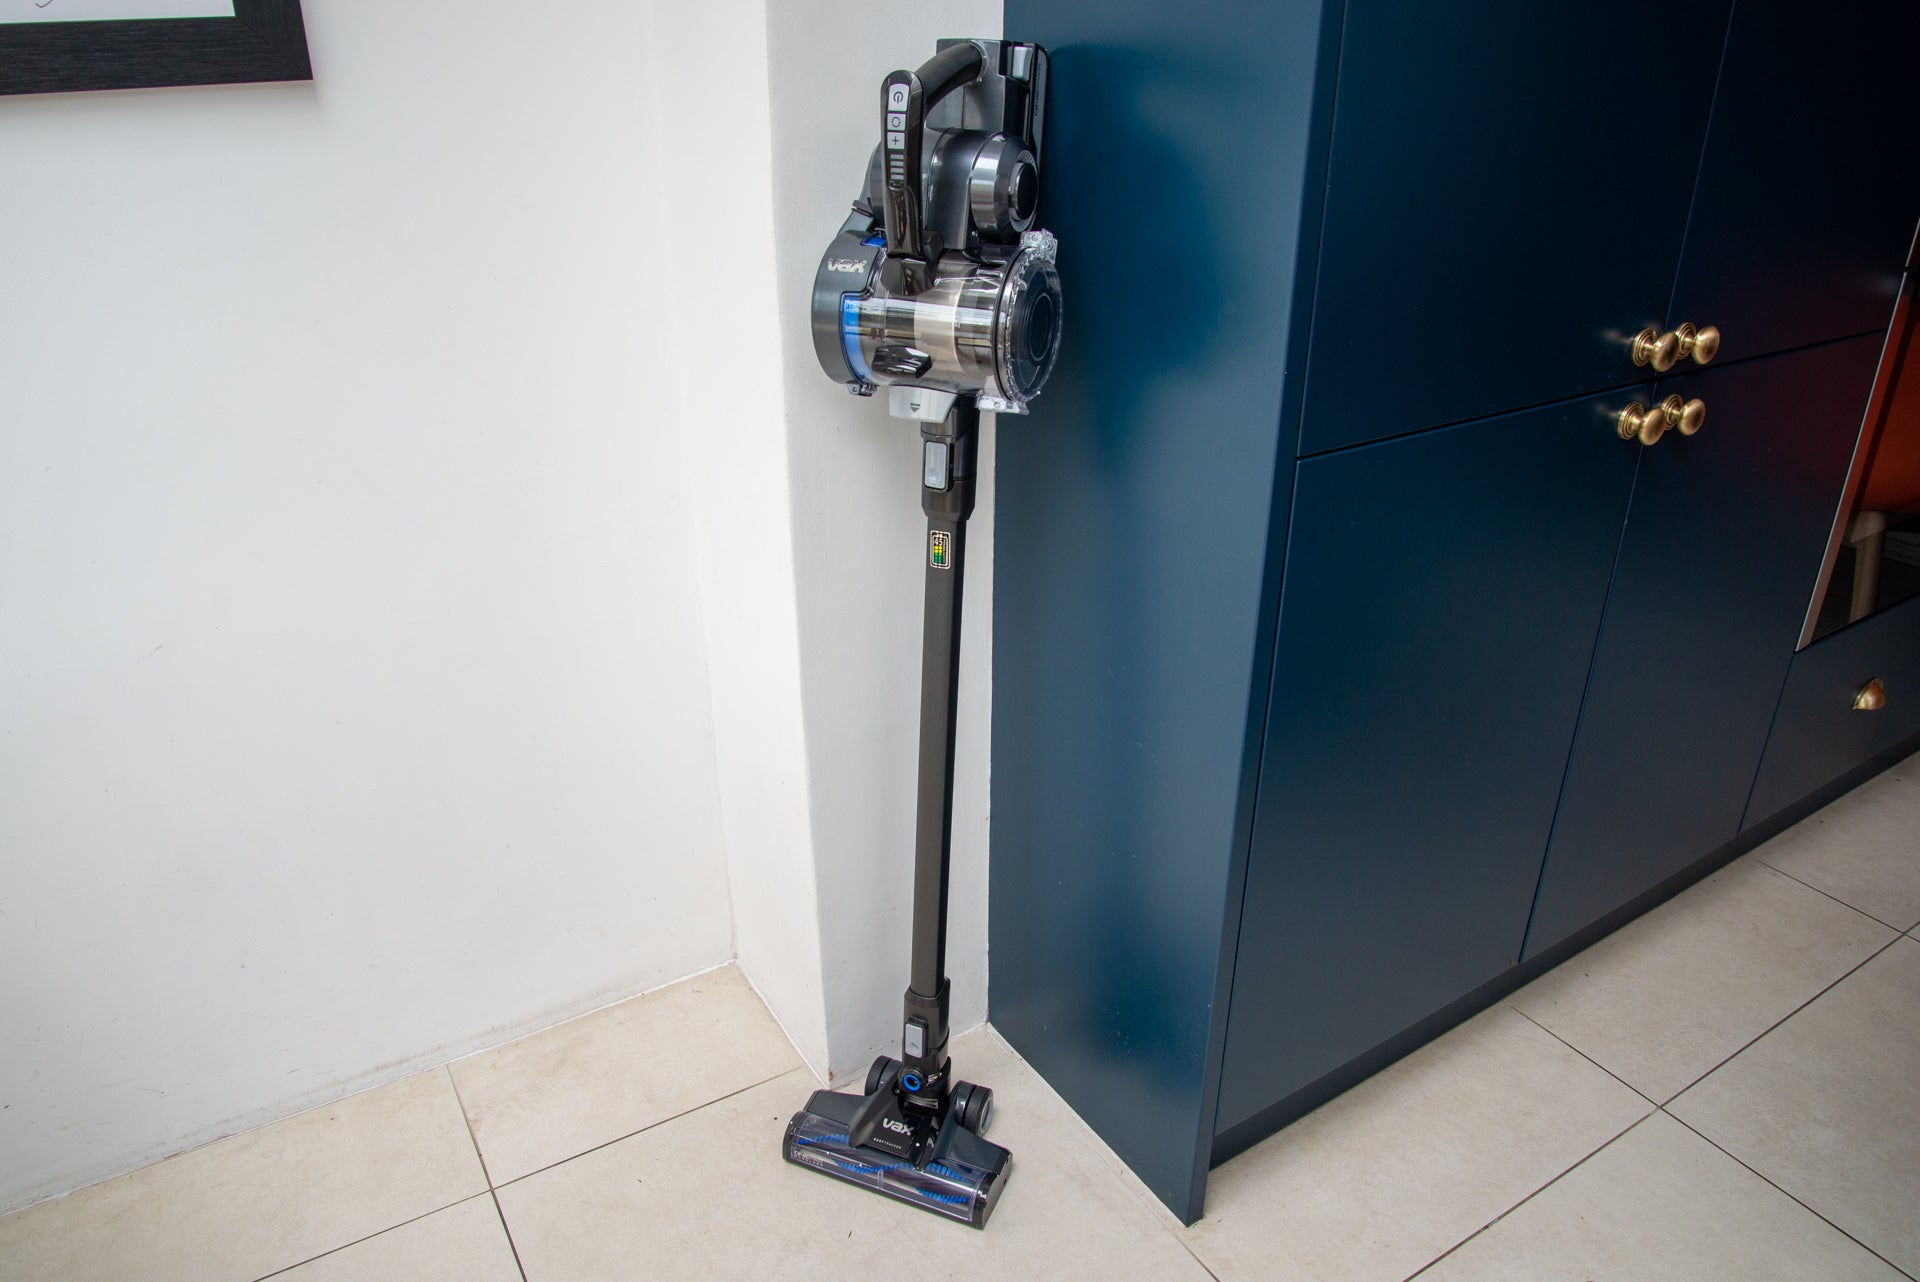 The best budget stick cordless vacuum cleaner is the Vax ONEPWR Blade 4